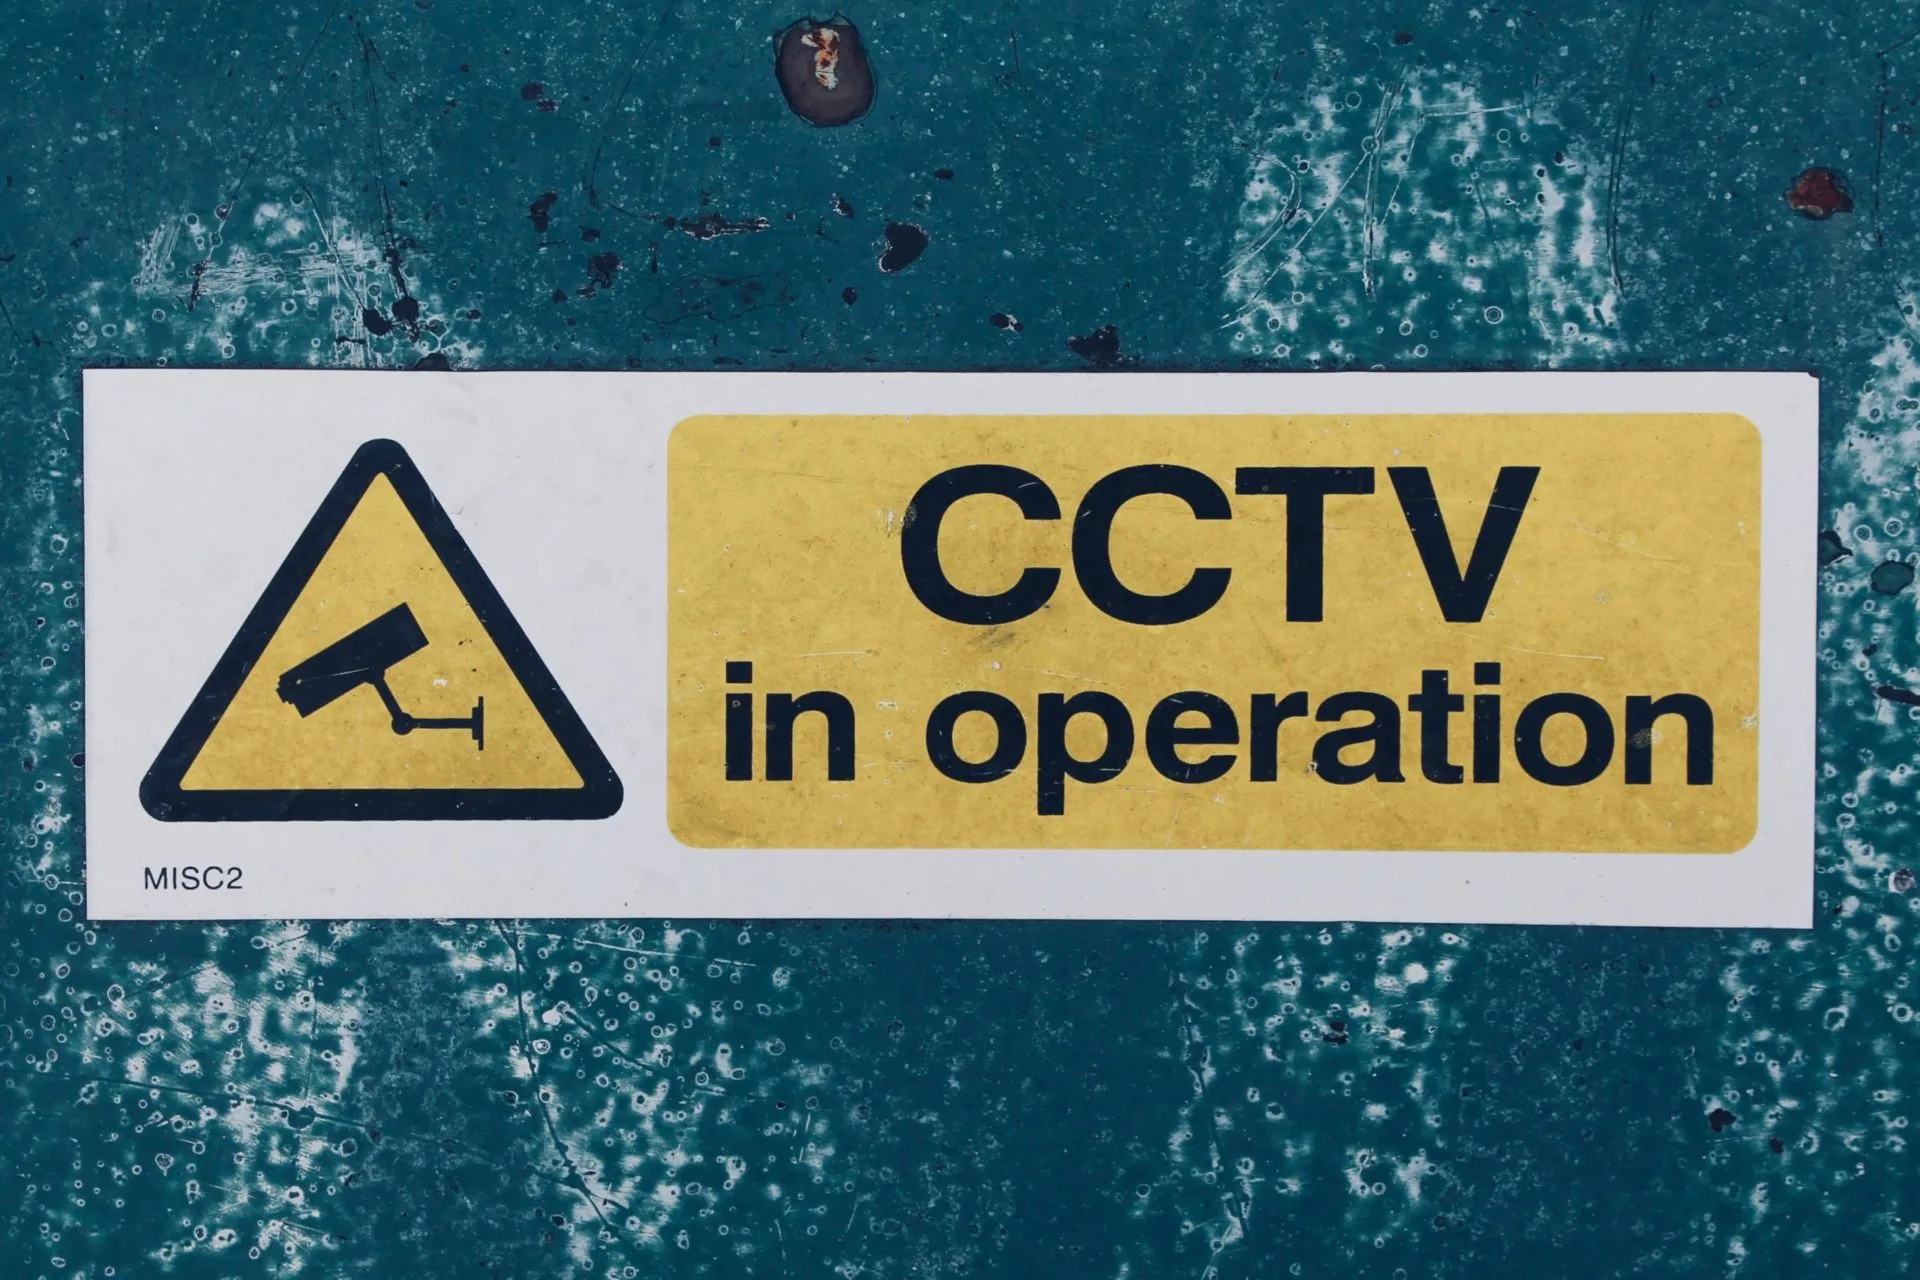 Thought provoking Channel 4 film The Watchman explores the power and issues of CCTV through drama